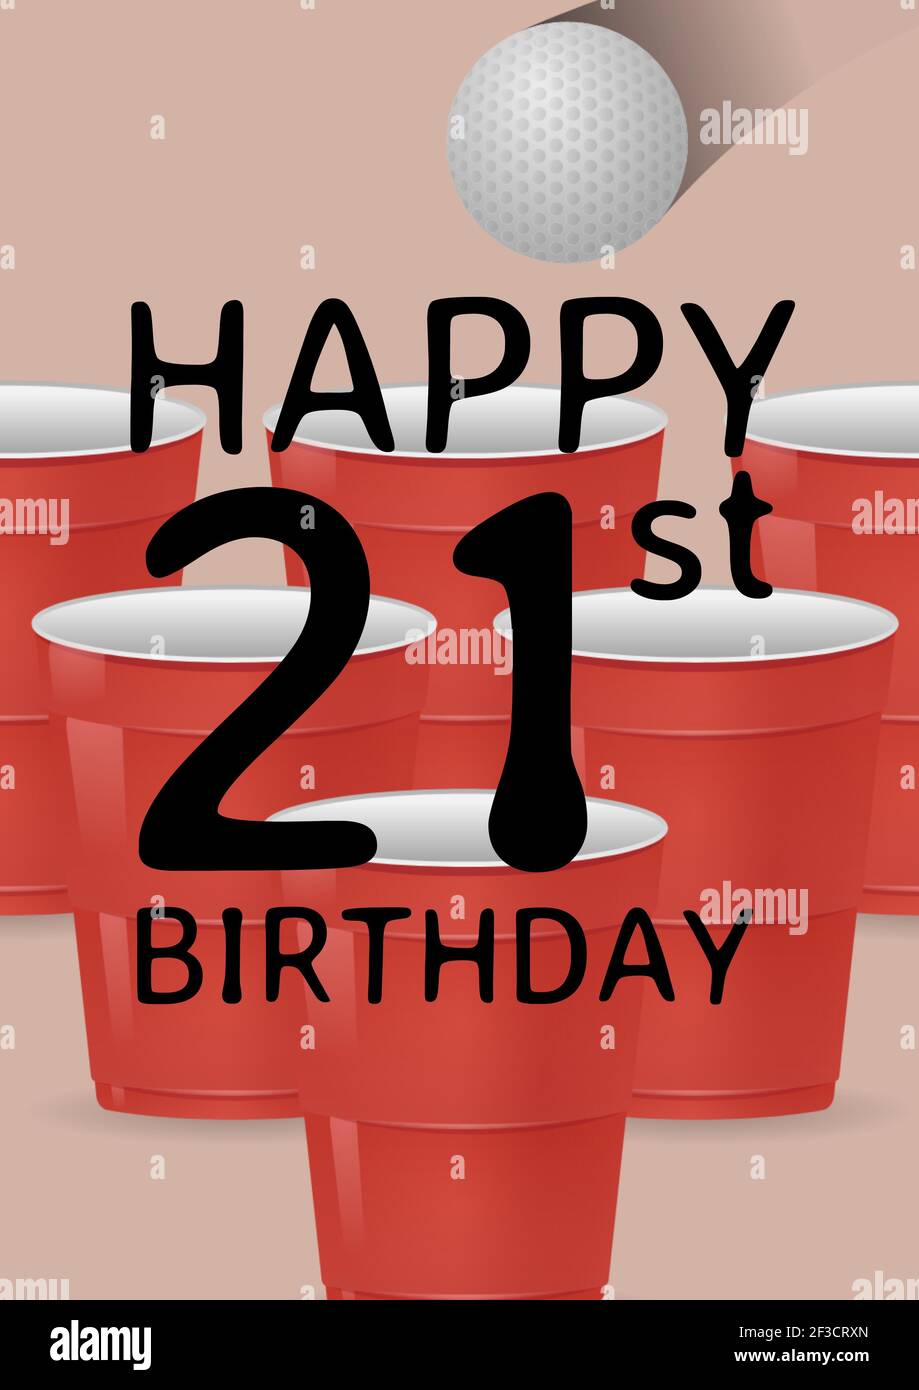 Digitally generated image of happy 21st birthday text against beer glasses in background Stock Photo